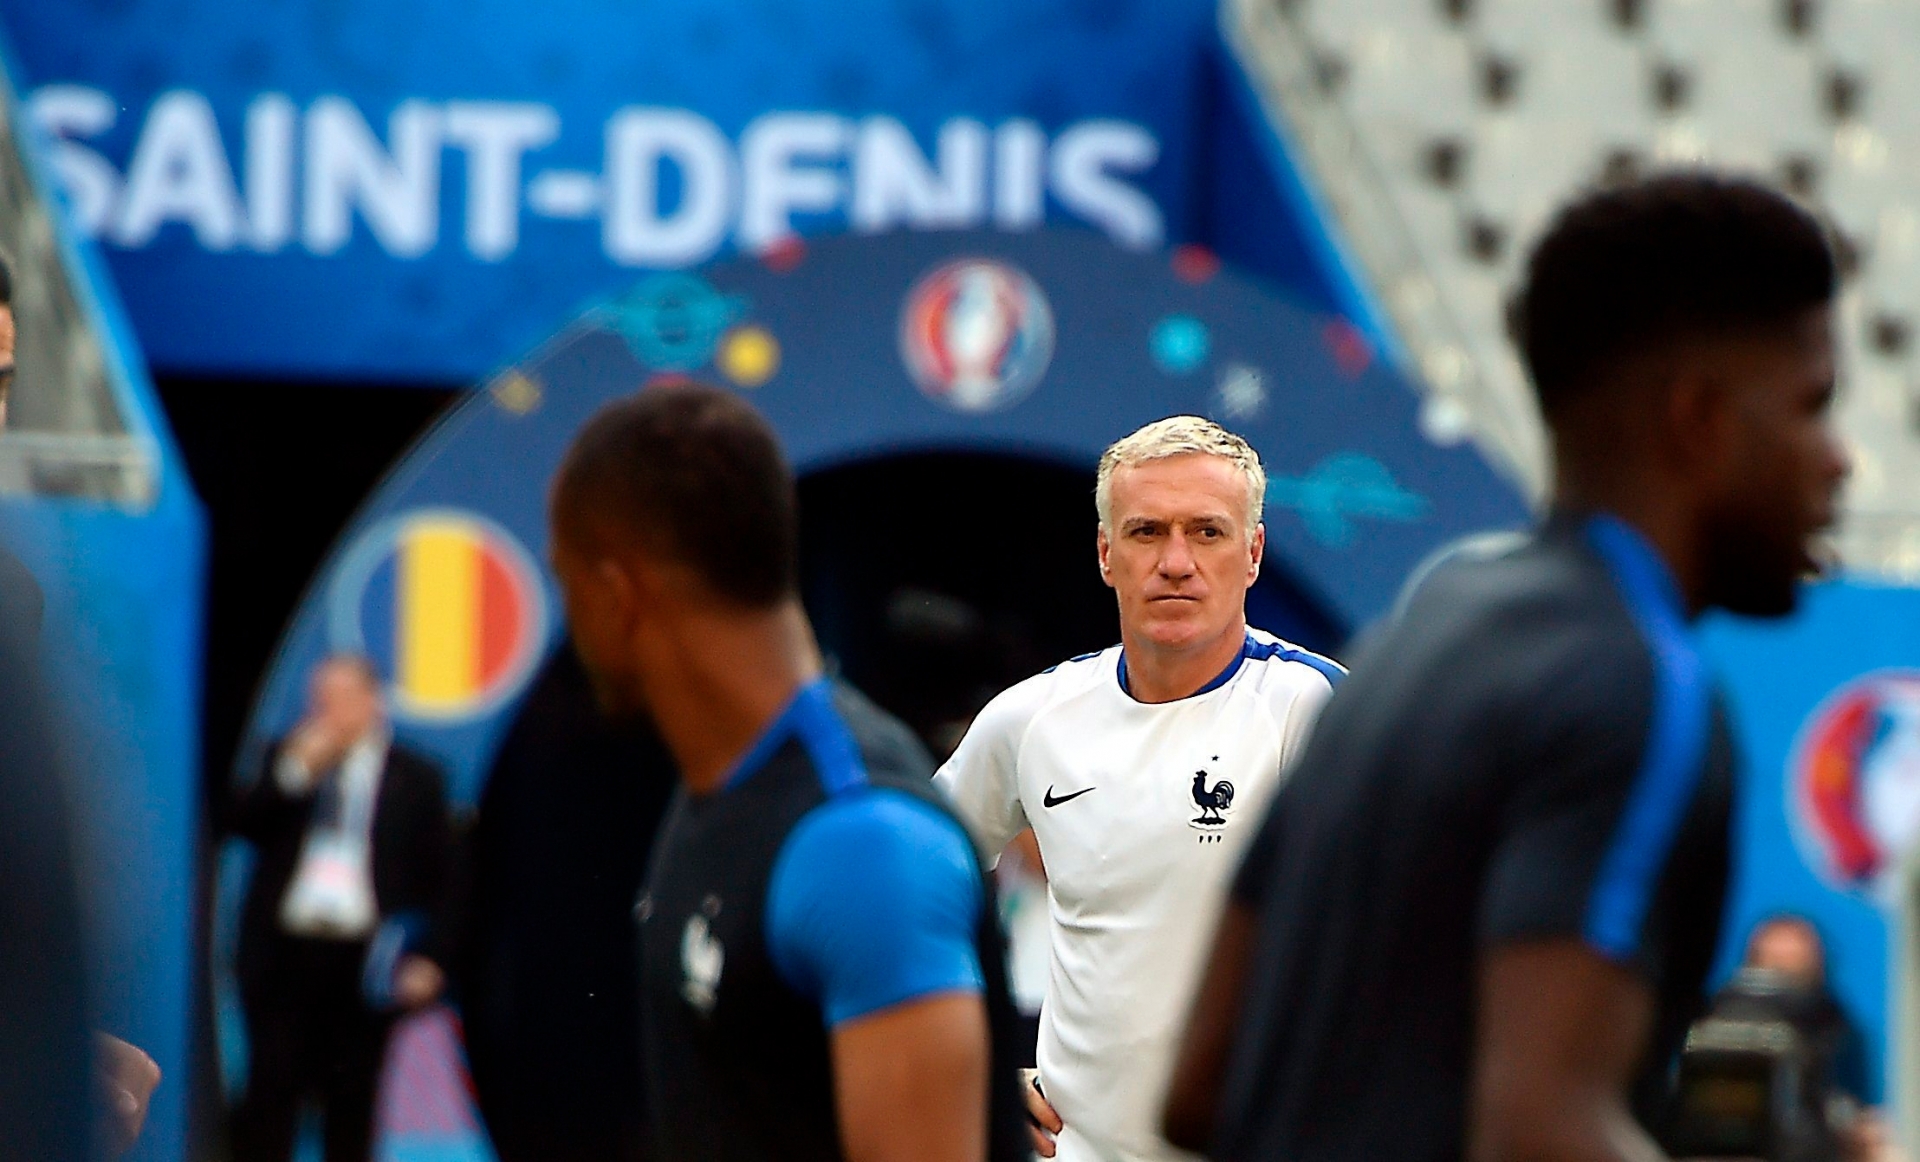 epa05353506 France national soccer team head coach Didier Deschamps (C) during a training session at the Stade de France in Saint-Denis, France, 09 June 2016. France will face Romania in the opening match of the UEFA EURO 2016 soccer championship on 10 June.



(RESTRICTIONS APPLY: For editorial news reporting purposes only. Not used for commercial or marketing purposes without prior written approval of UEFA. Images must appear as still images and must not emulate match action video footage. Photographs published in online publications (whether via the Internet or otherwise) shall have an interval of at least 20 seconds between the posting.)  EPA/Tibor Illyes HUNGARY OUT FRANCE SOCCER UEFA EURO 2016